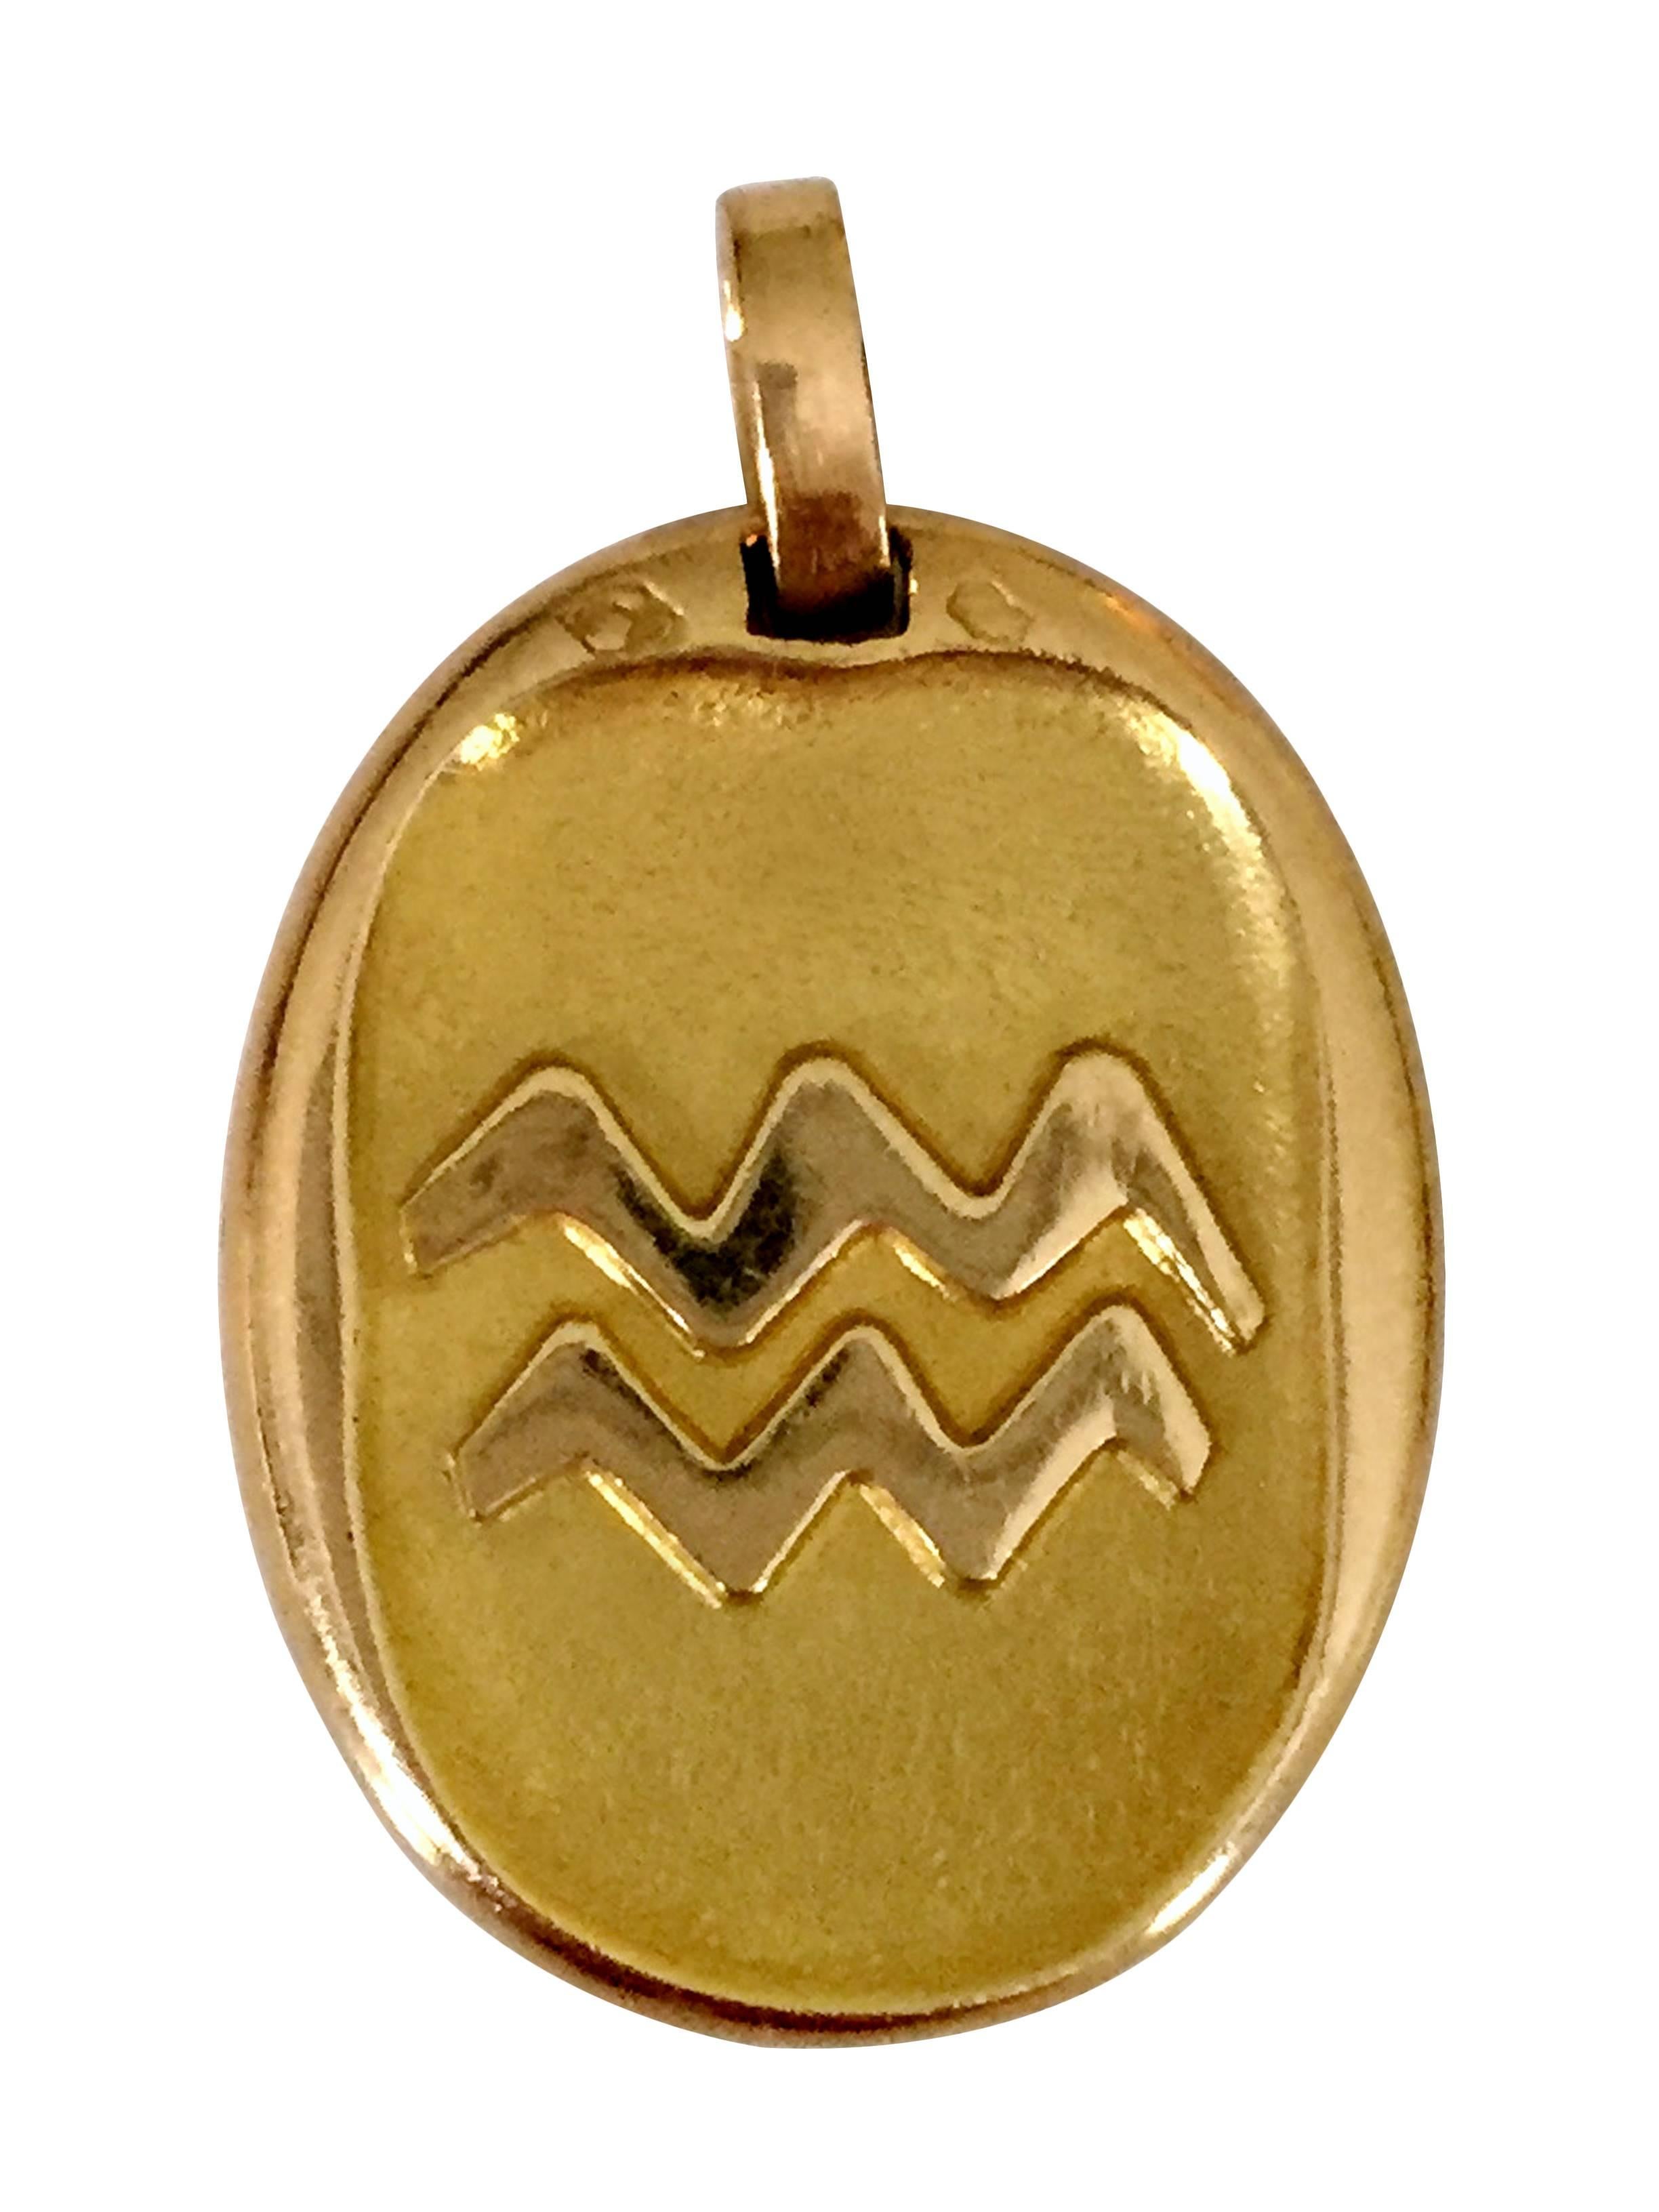 A 18 K yellow gold zodiac medal ( Aquarius)
Made in the 1960s and 1970s these rare zodiac pendant are a collector's must have.
Signed Cartier Paris and Numbered 108373

